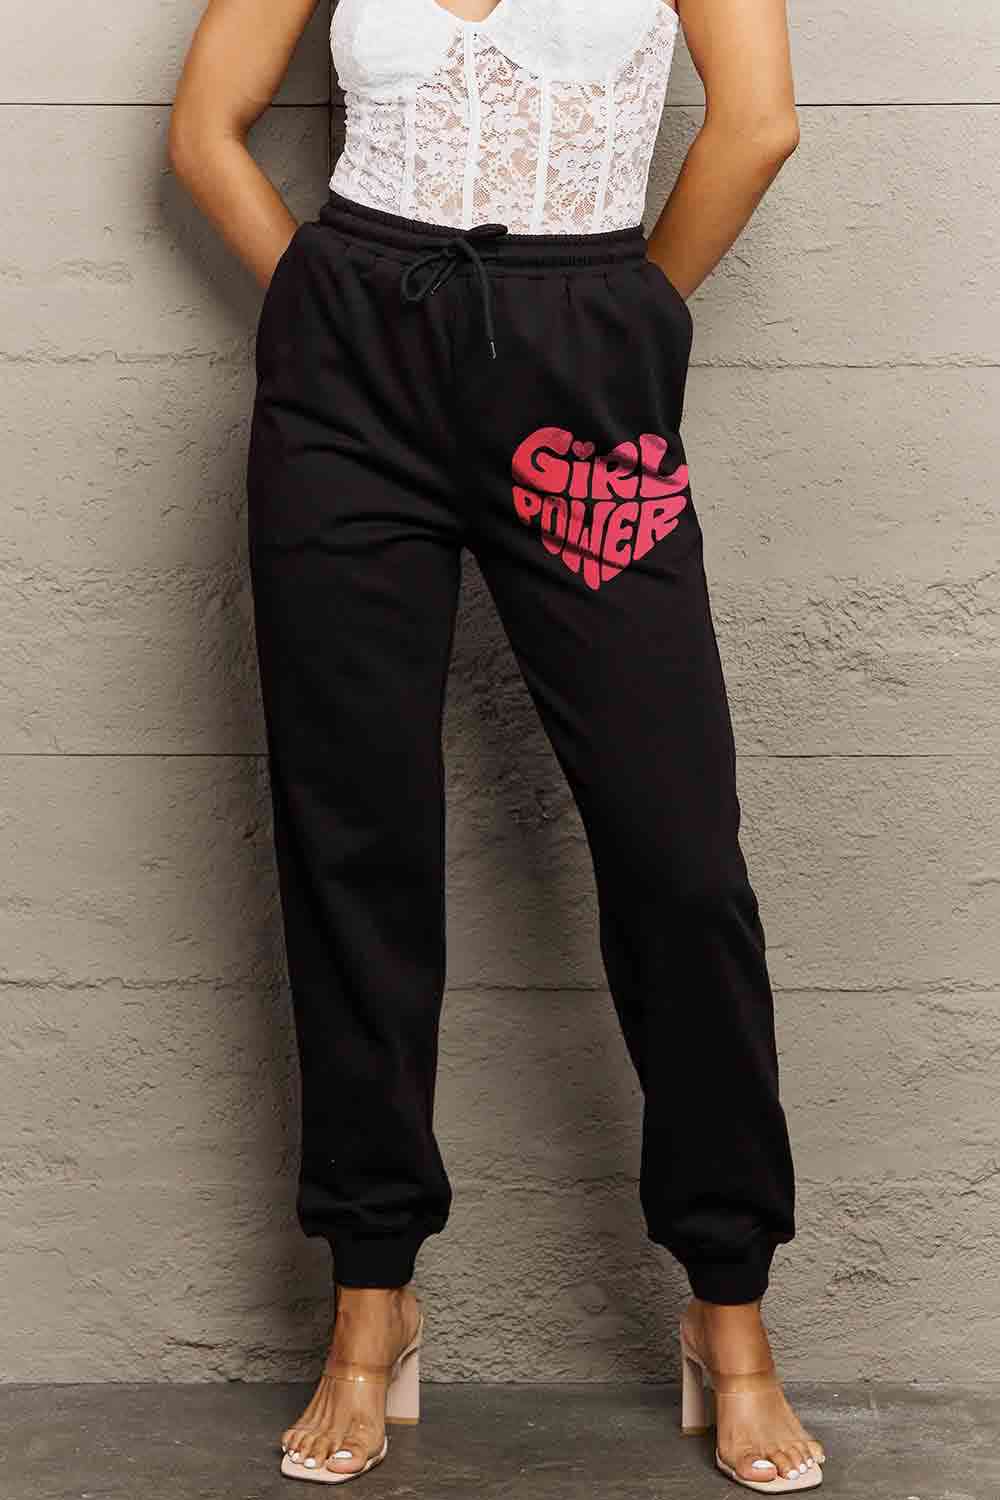 Simply Love Full Size GIRL POWER Graphic Sweatpants